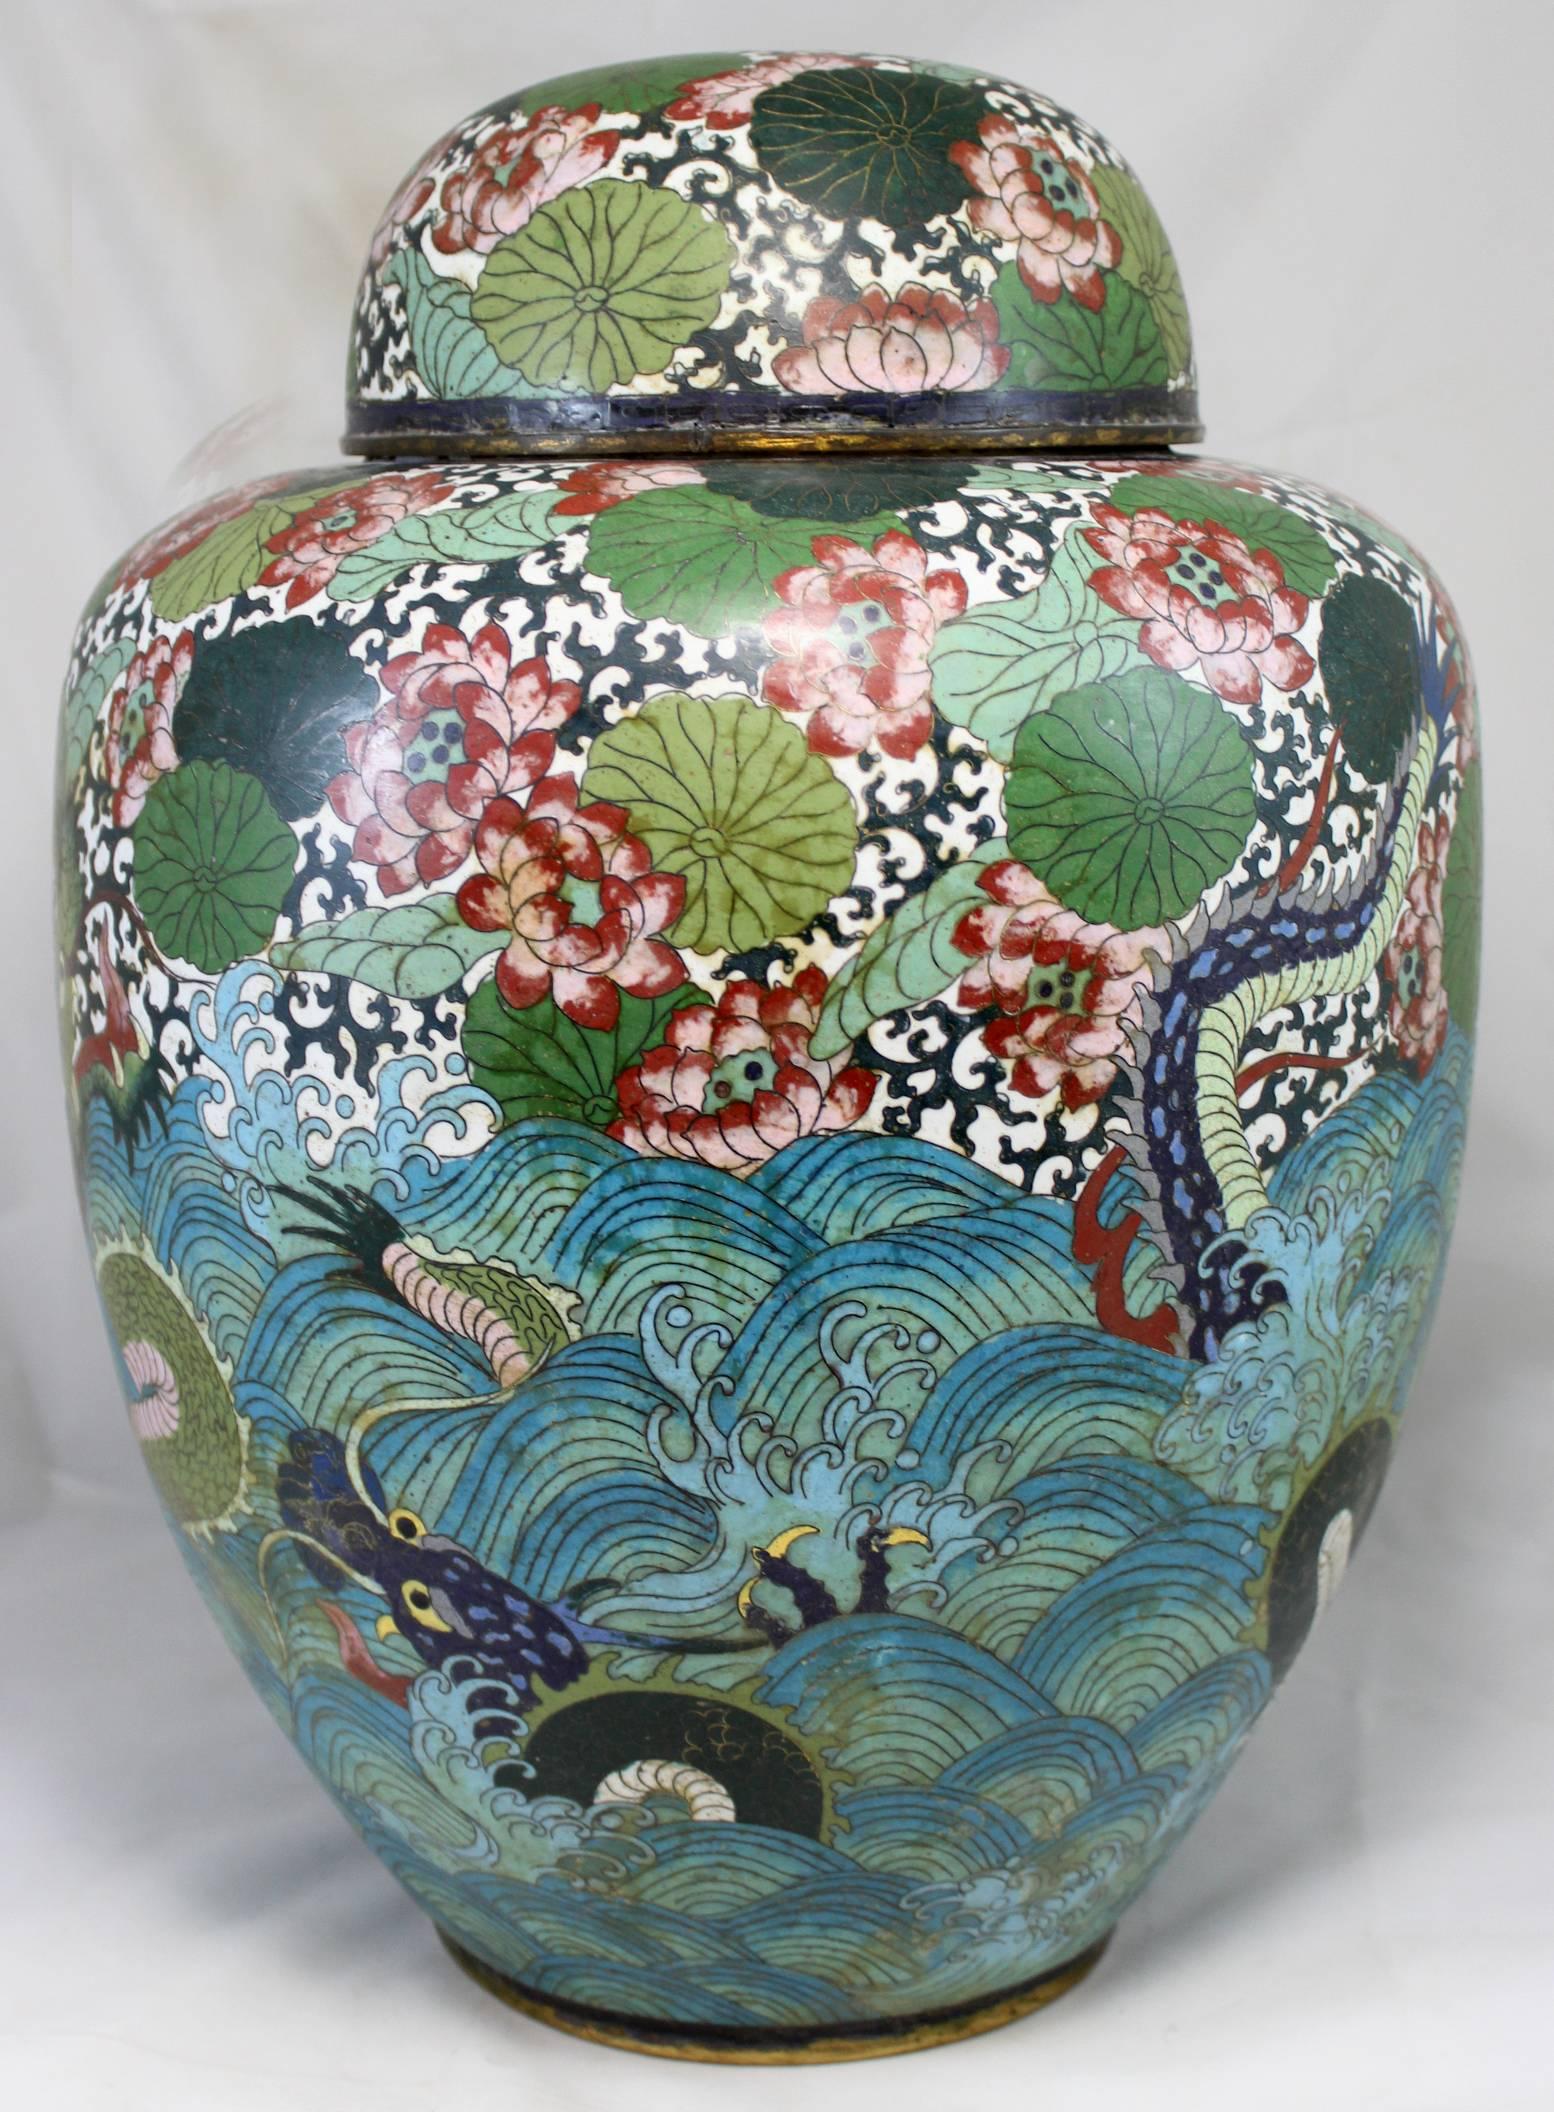 Cloissoné Large 19th Century Chinese Cloisonné Covered Jar or Urn with Sea Serpent